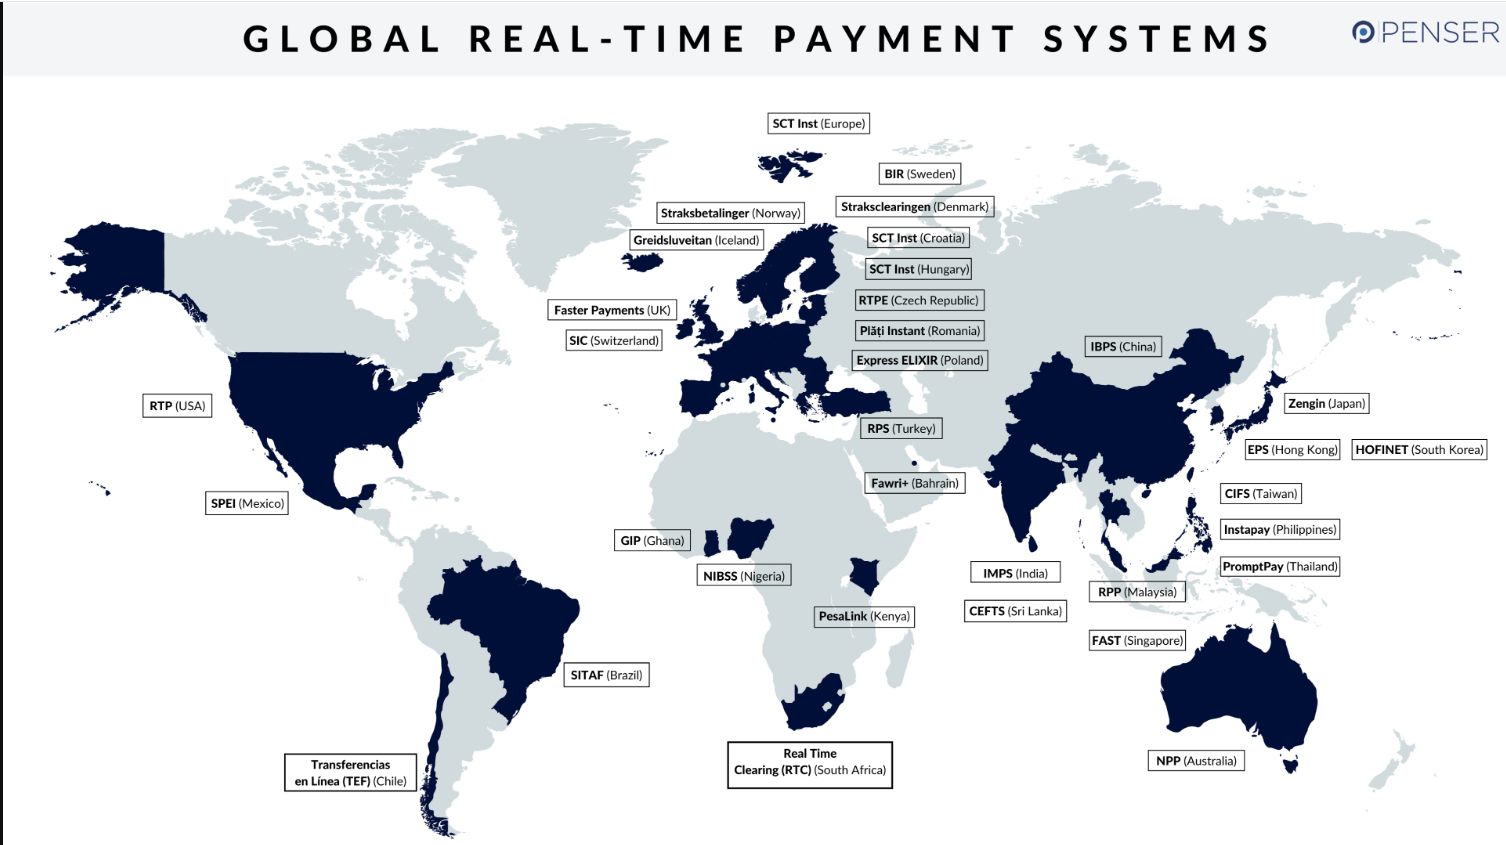 Global real-time payment systems